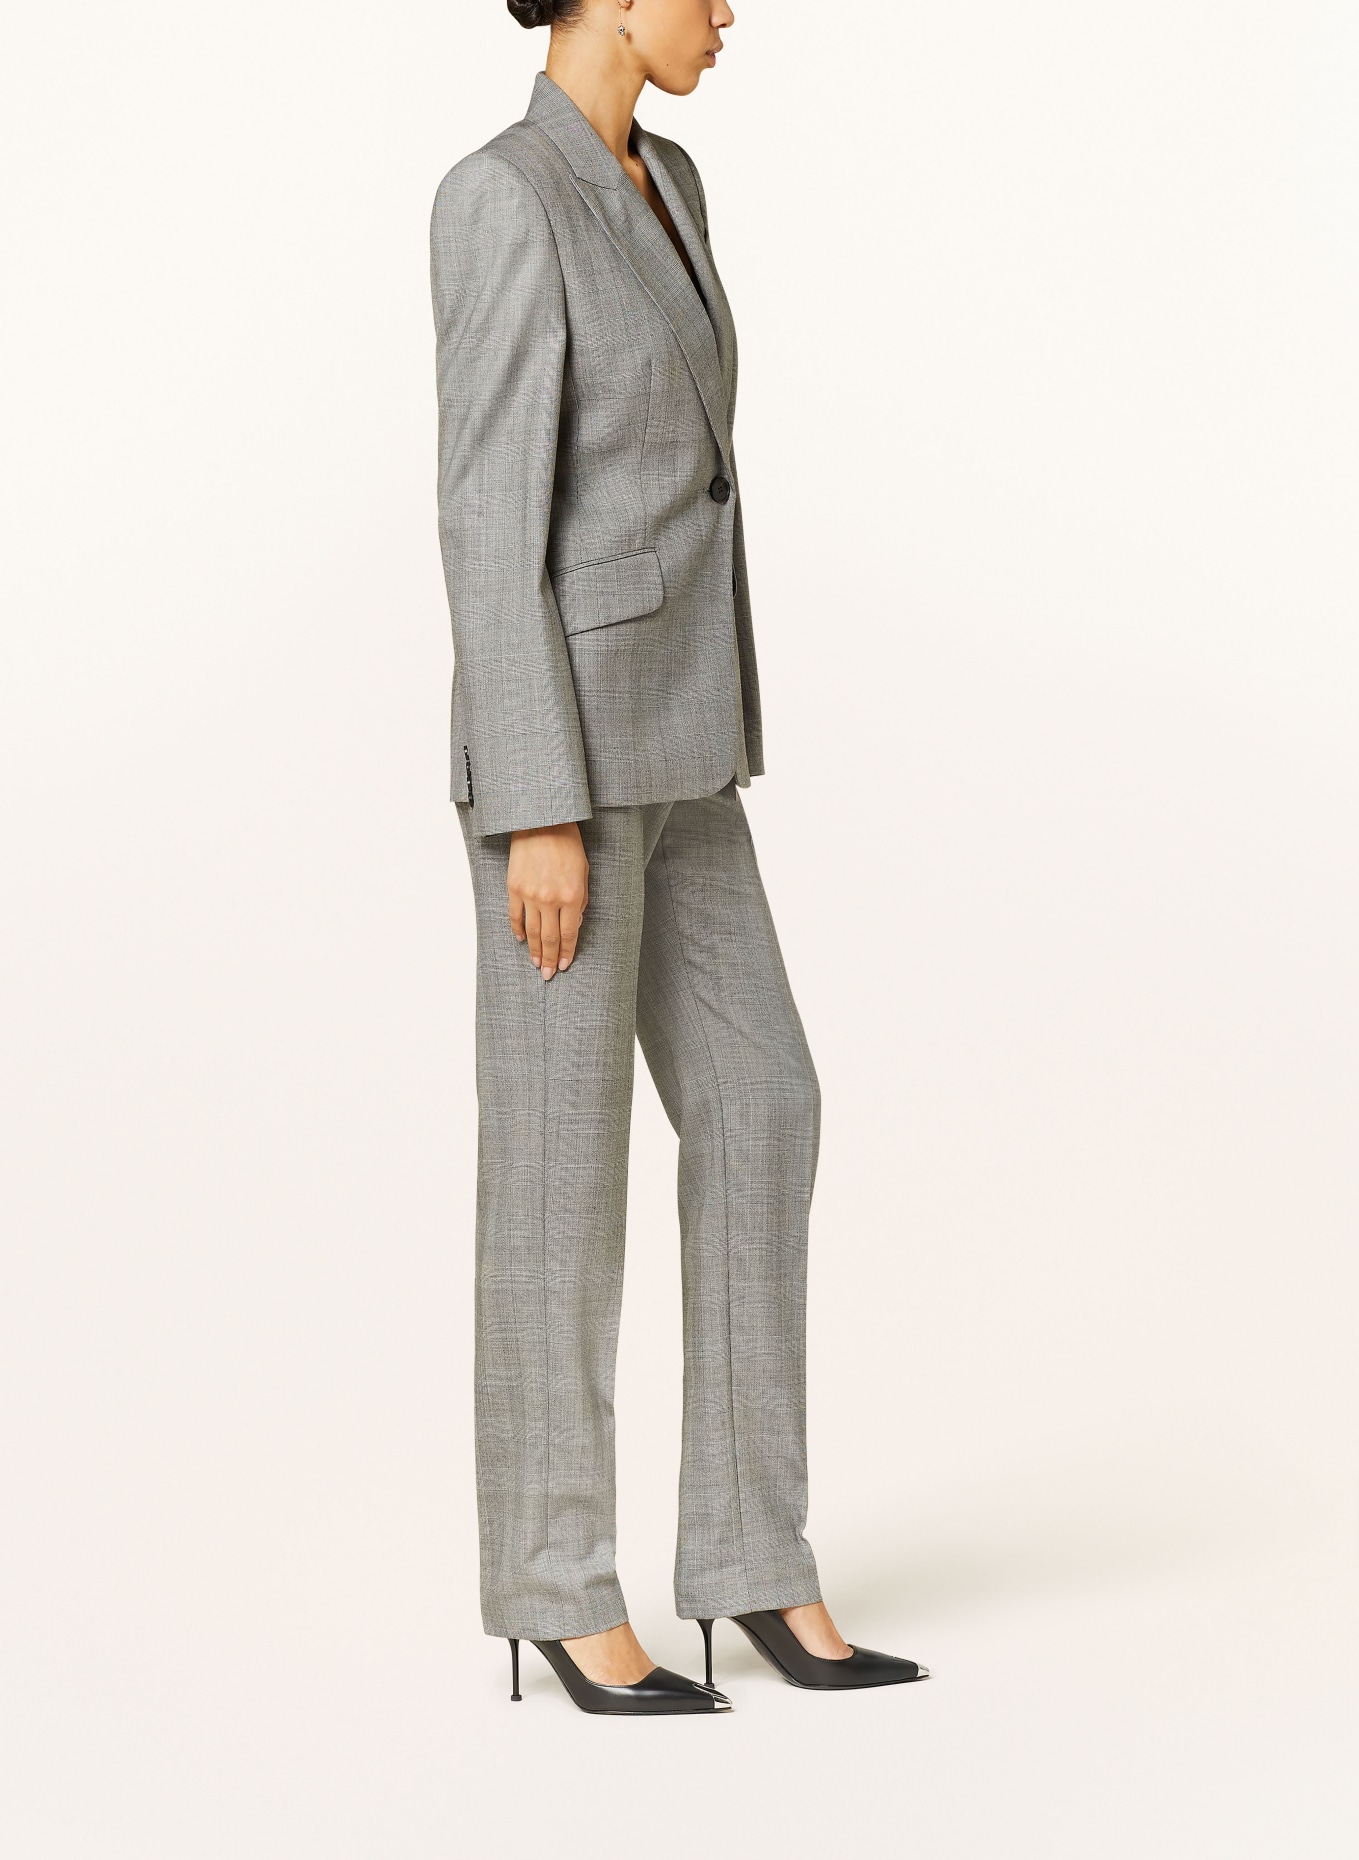 Alexander McQUEEN Trousers, Color: GRAY (Image 4)